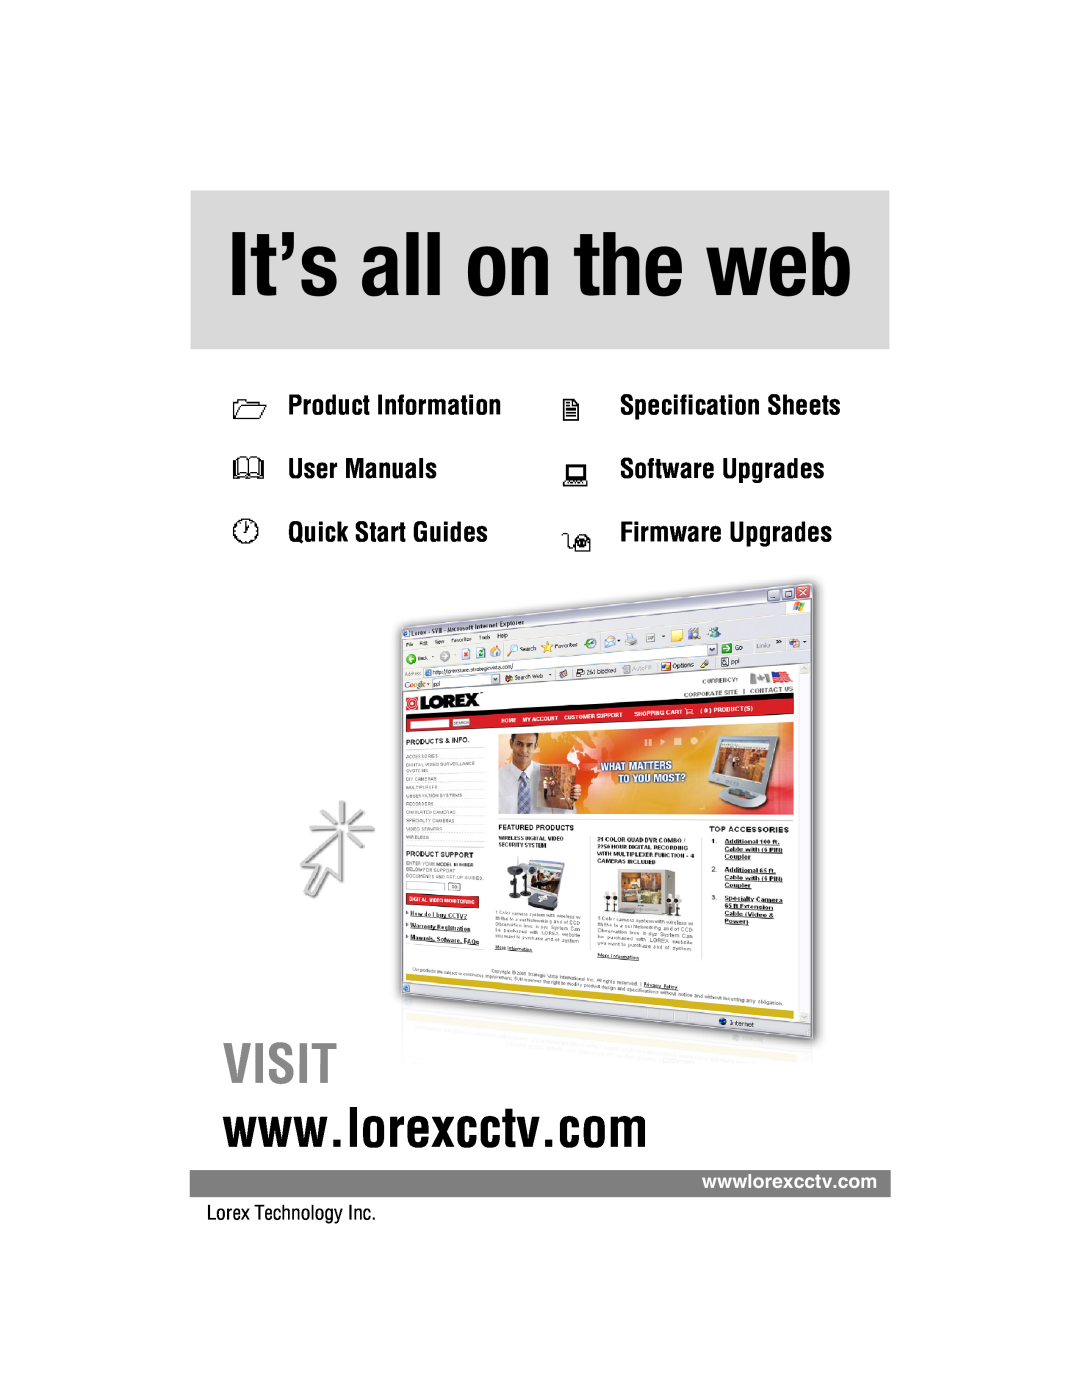 LOREX Technology SG19LD80 manual Product Information, It’s all on the web, Visit, Quick Start Guides, Software Upgrades 